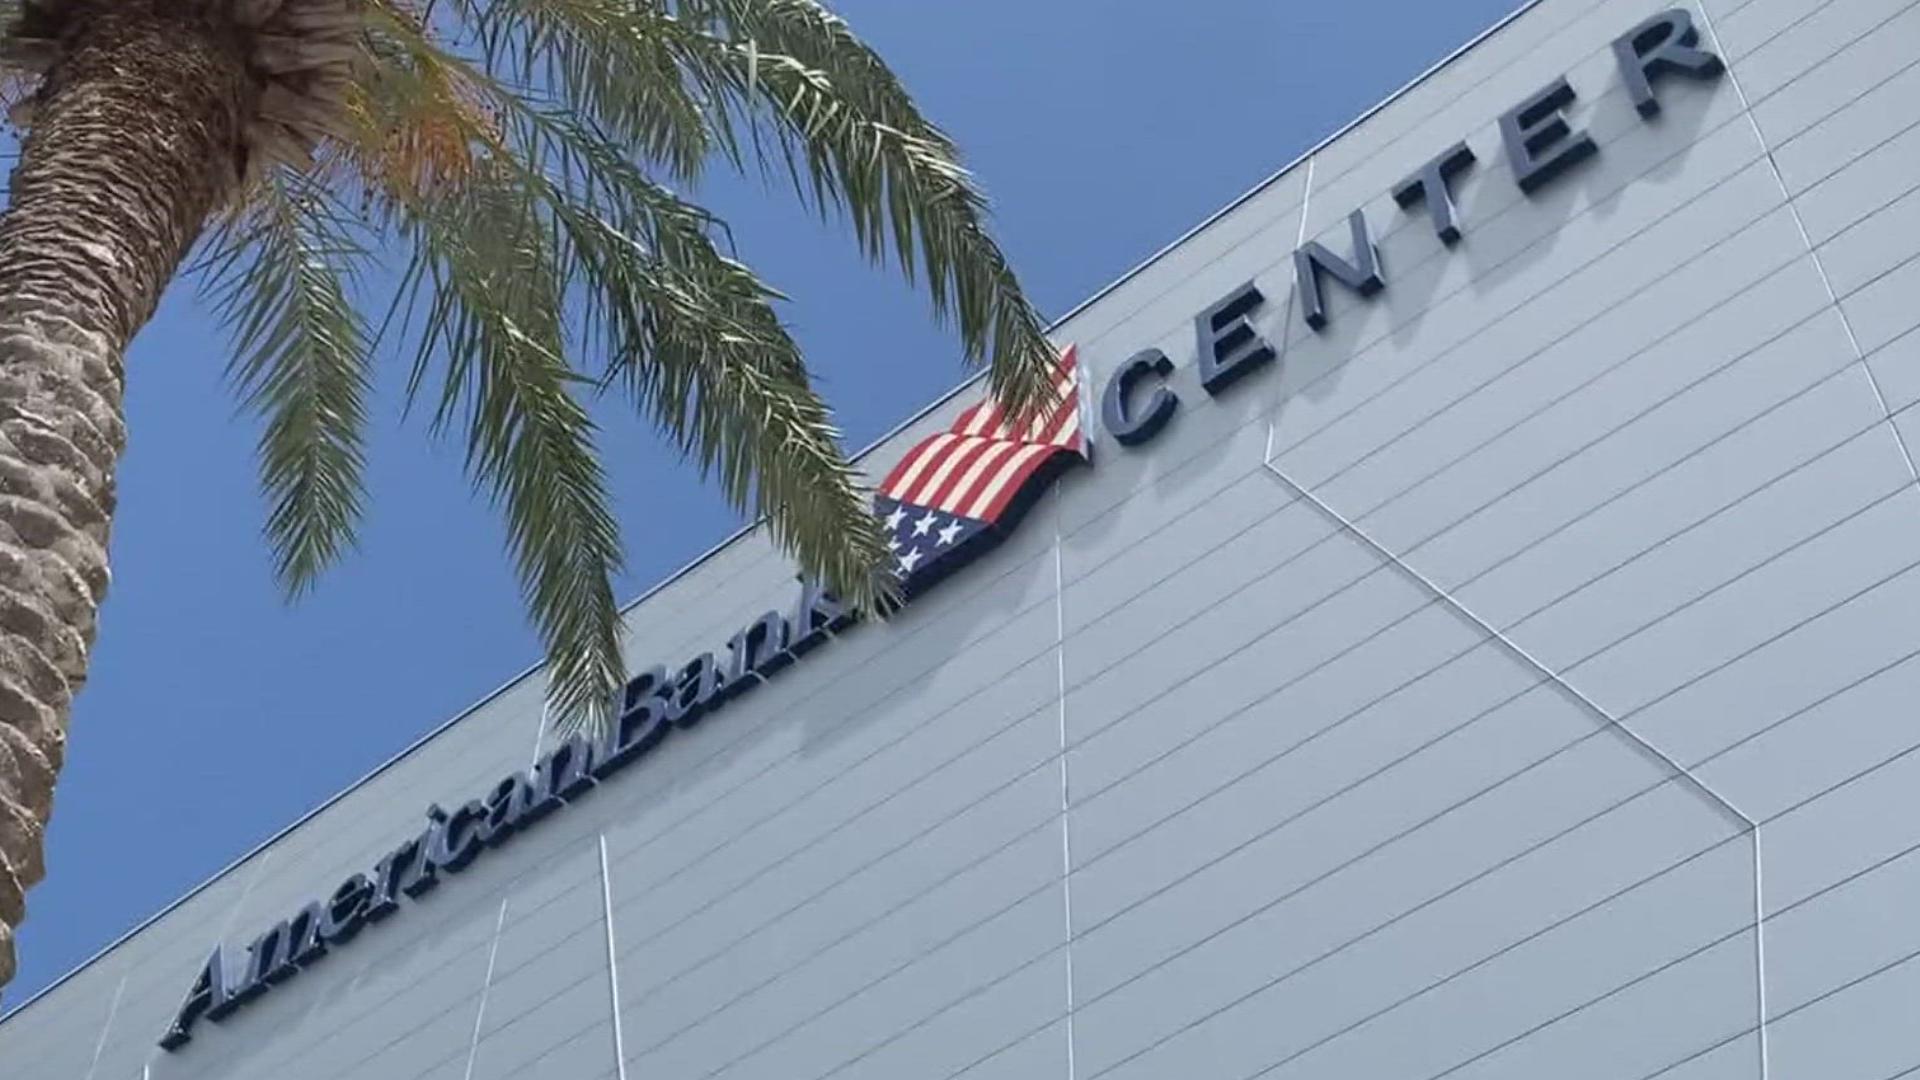 The company that manages the American Bank Center, OVG 360, has about five months to pick a new name before the naming rights expire on September 30.